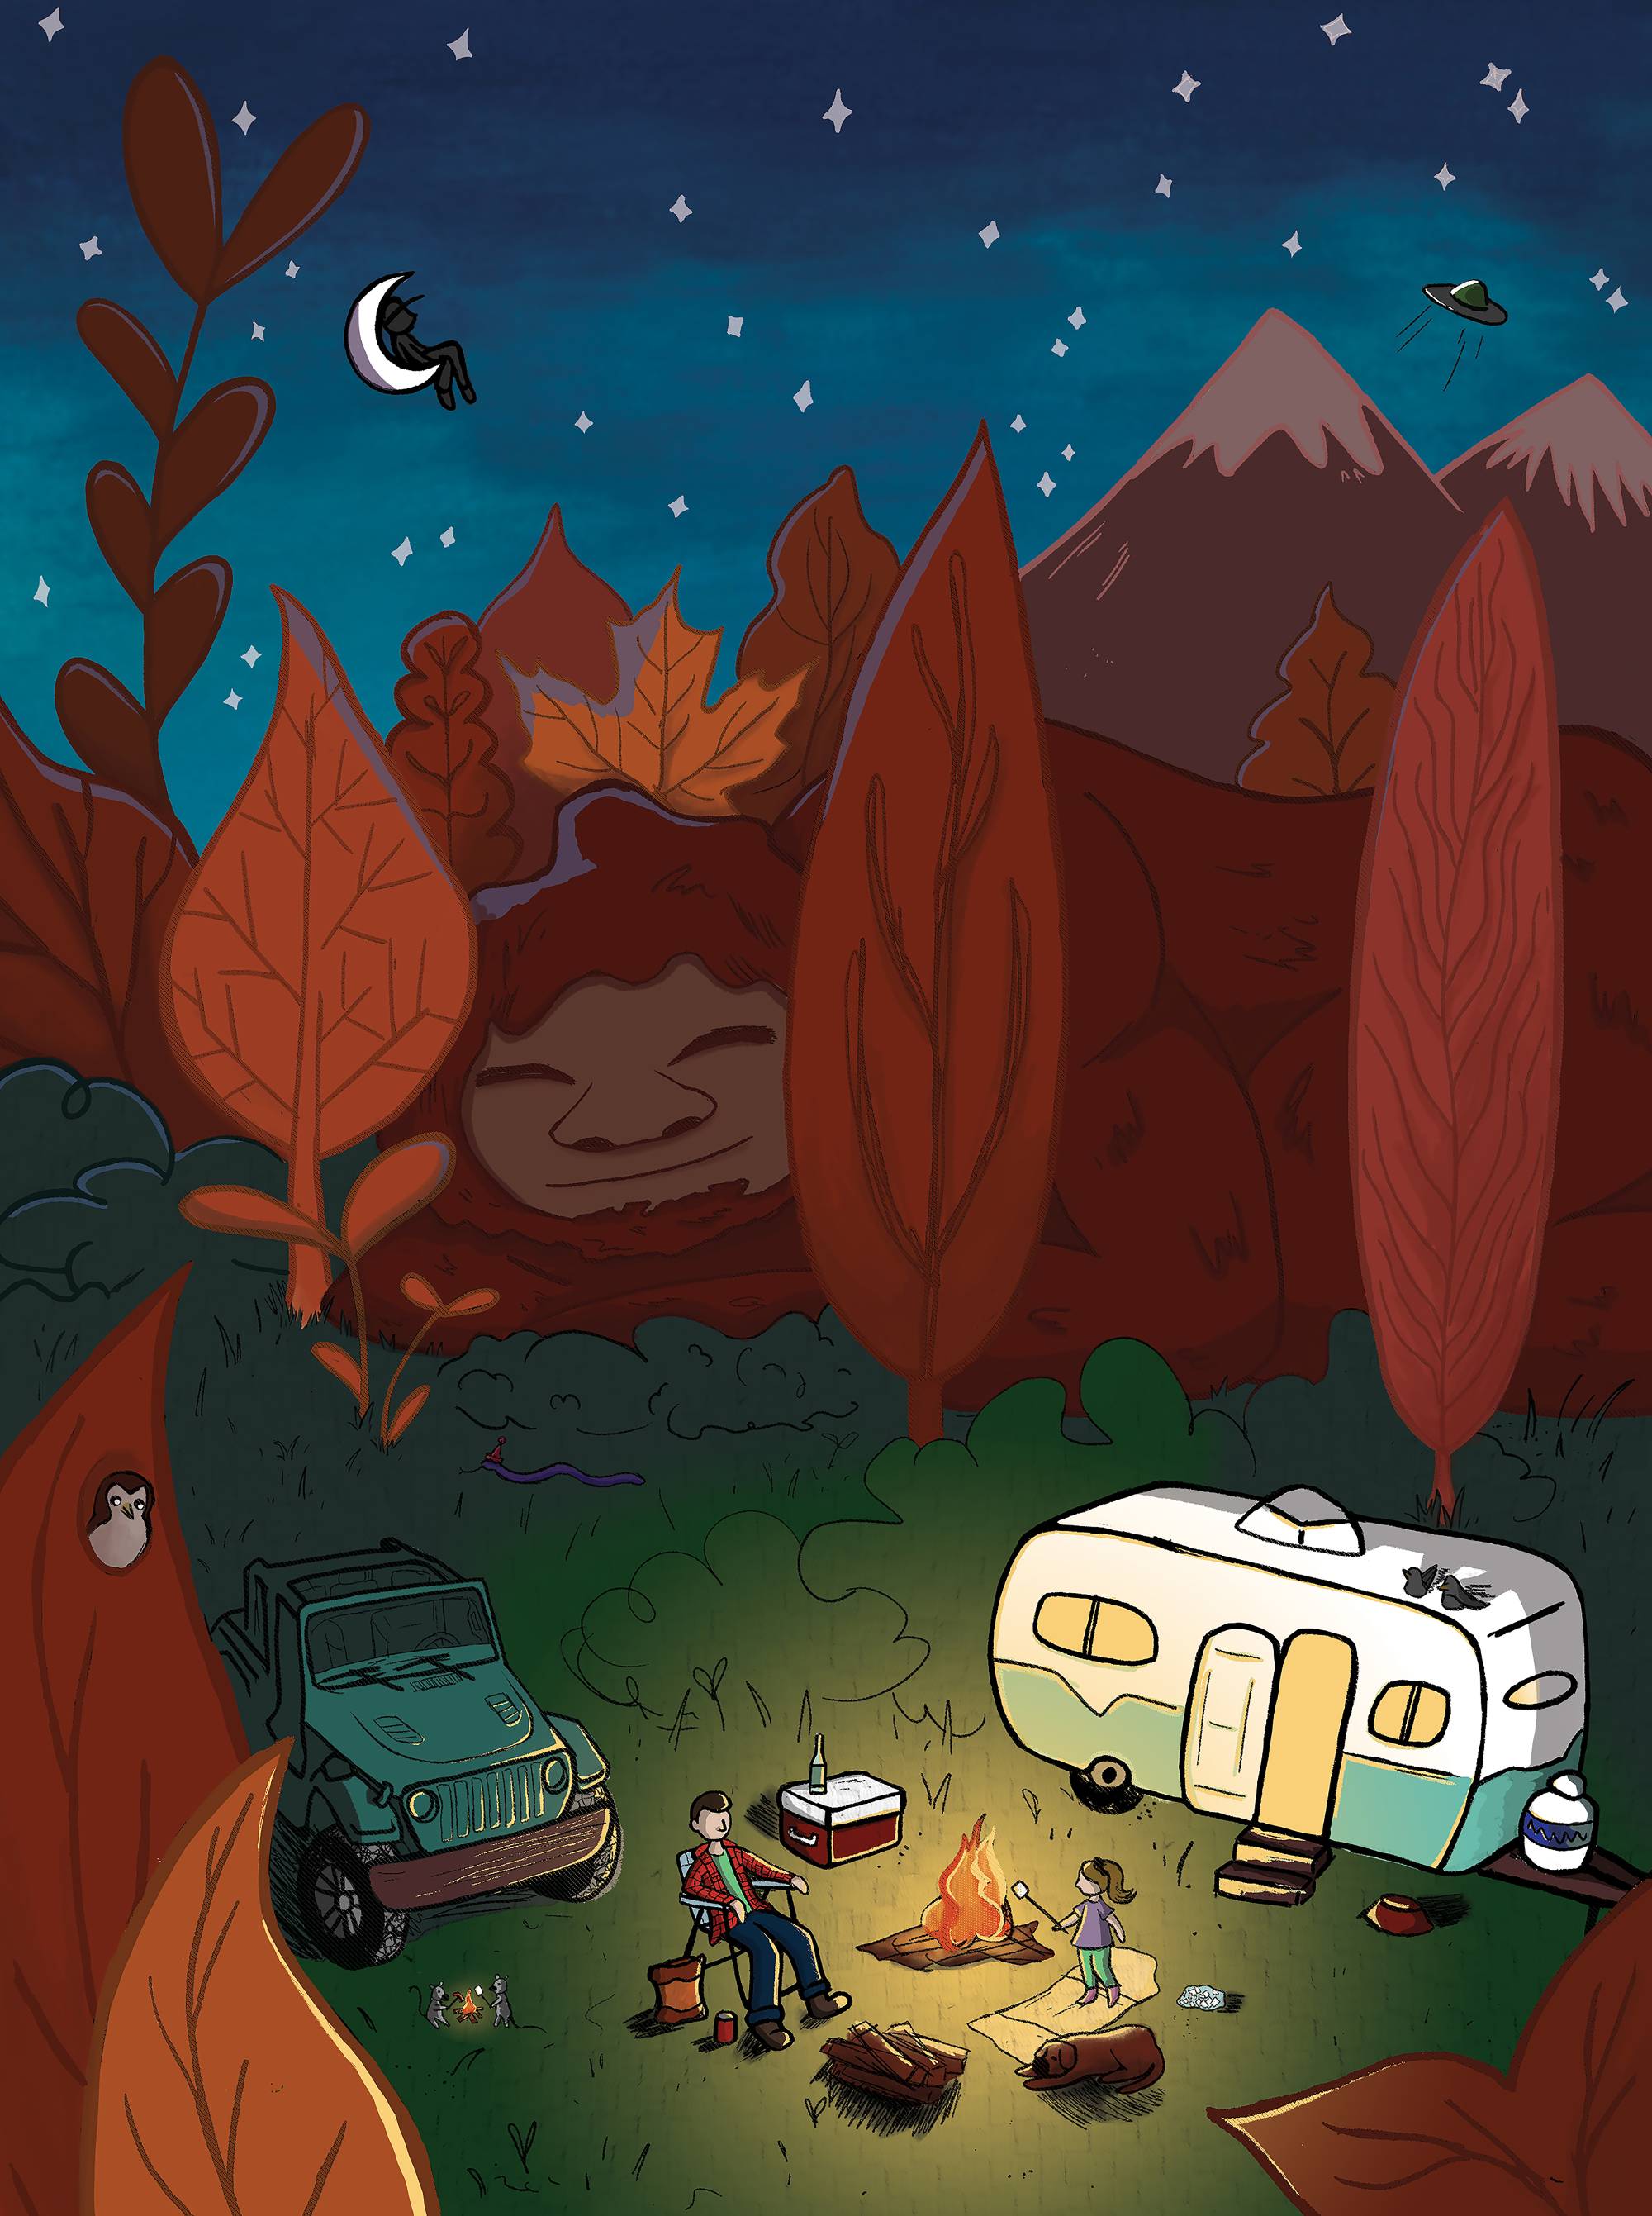 digital illustration of group camping in woods at night